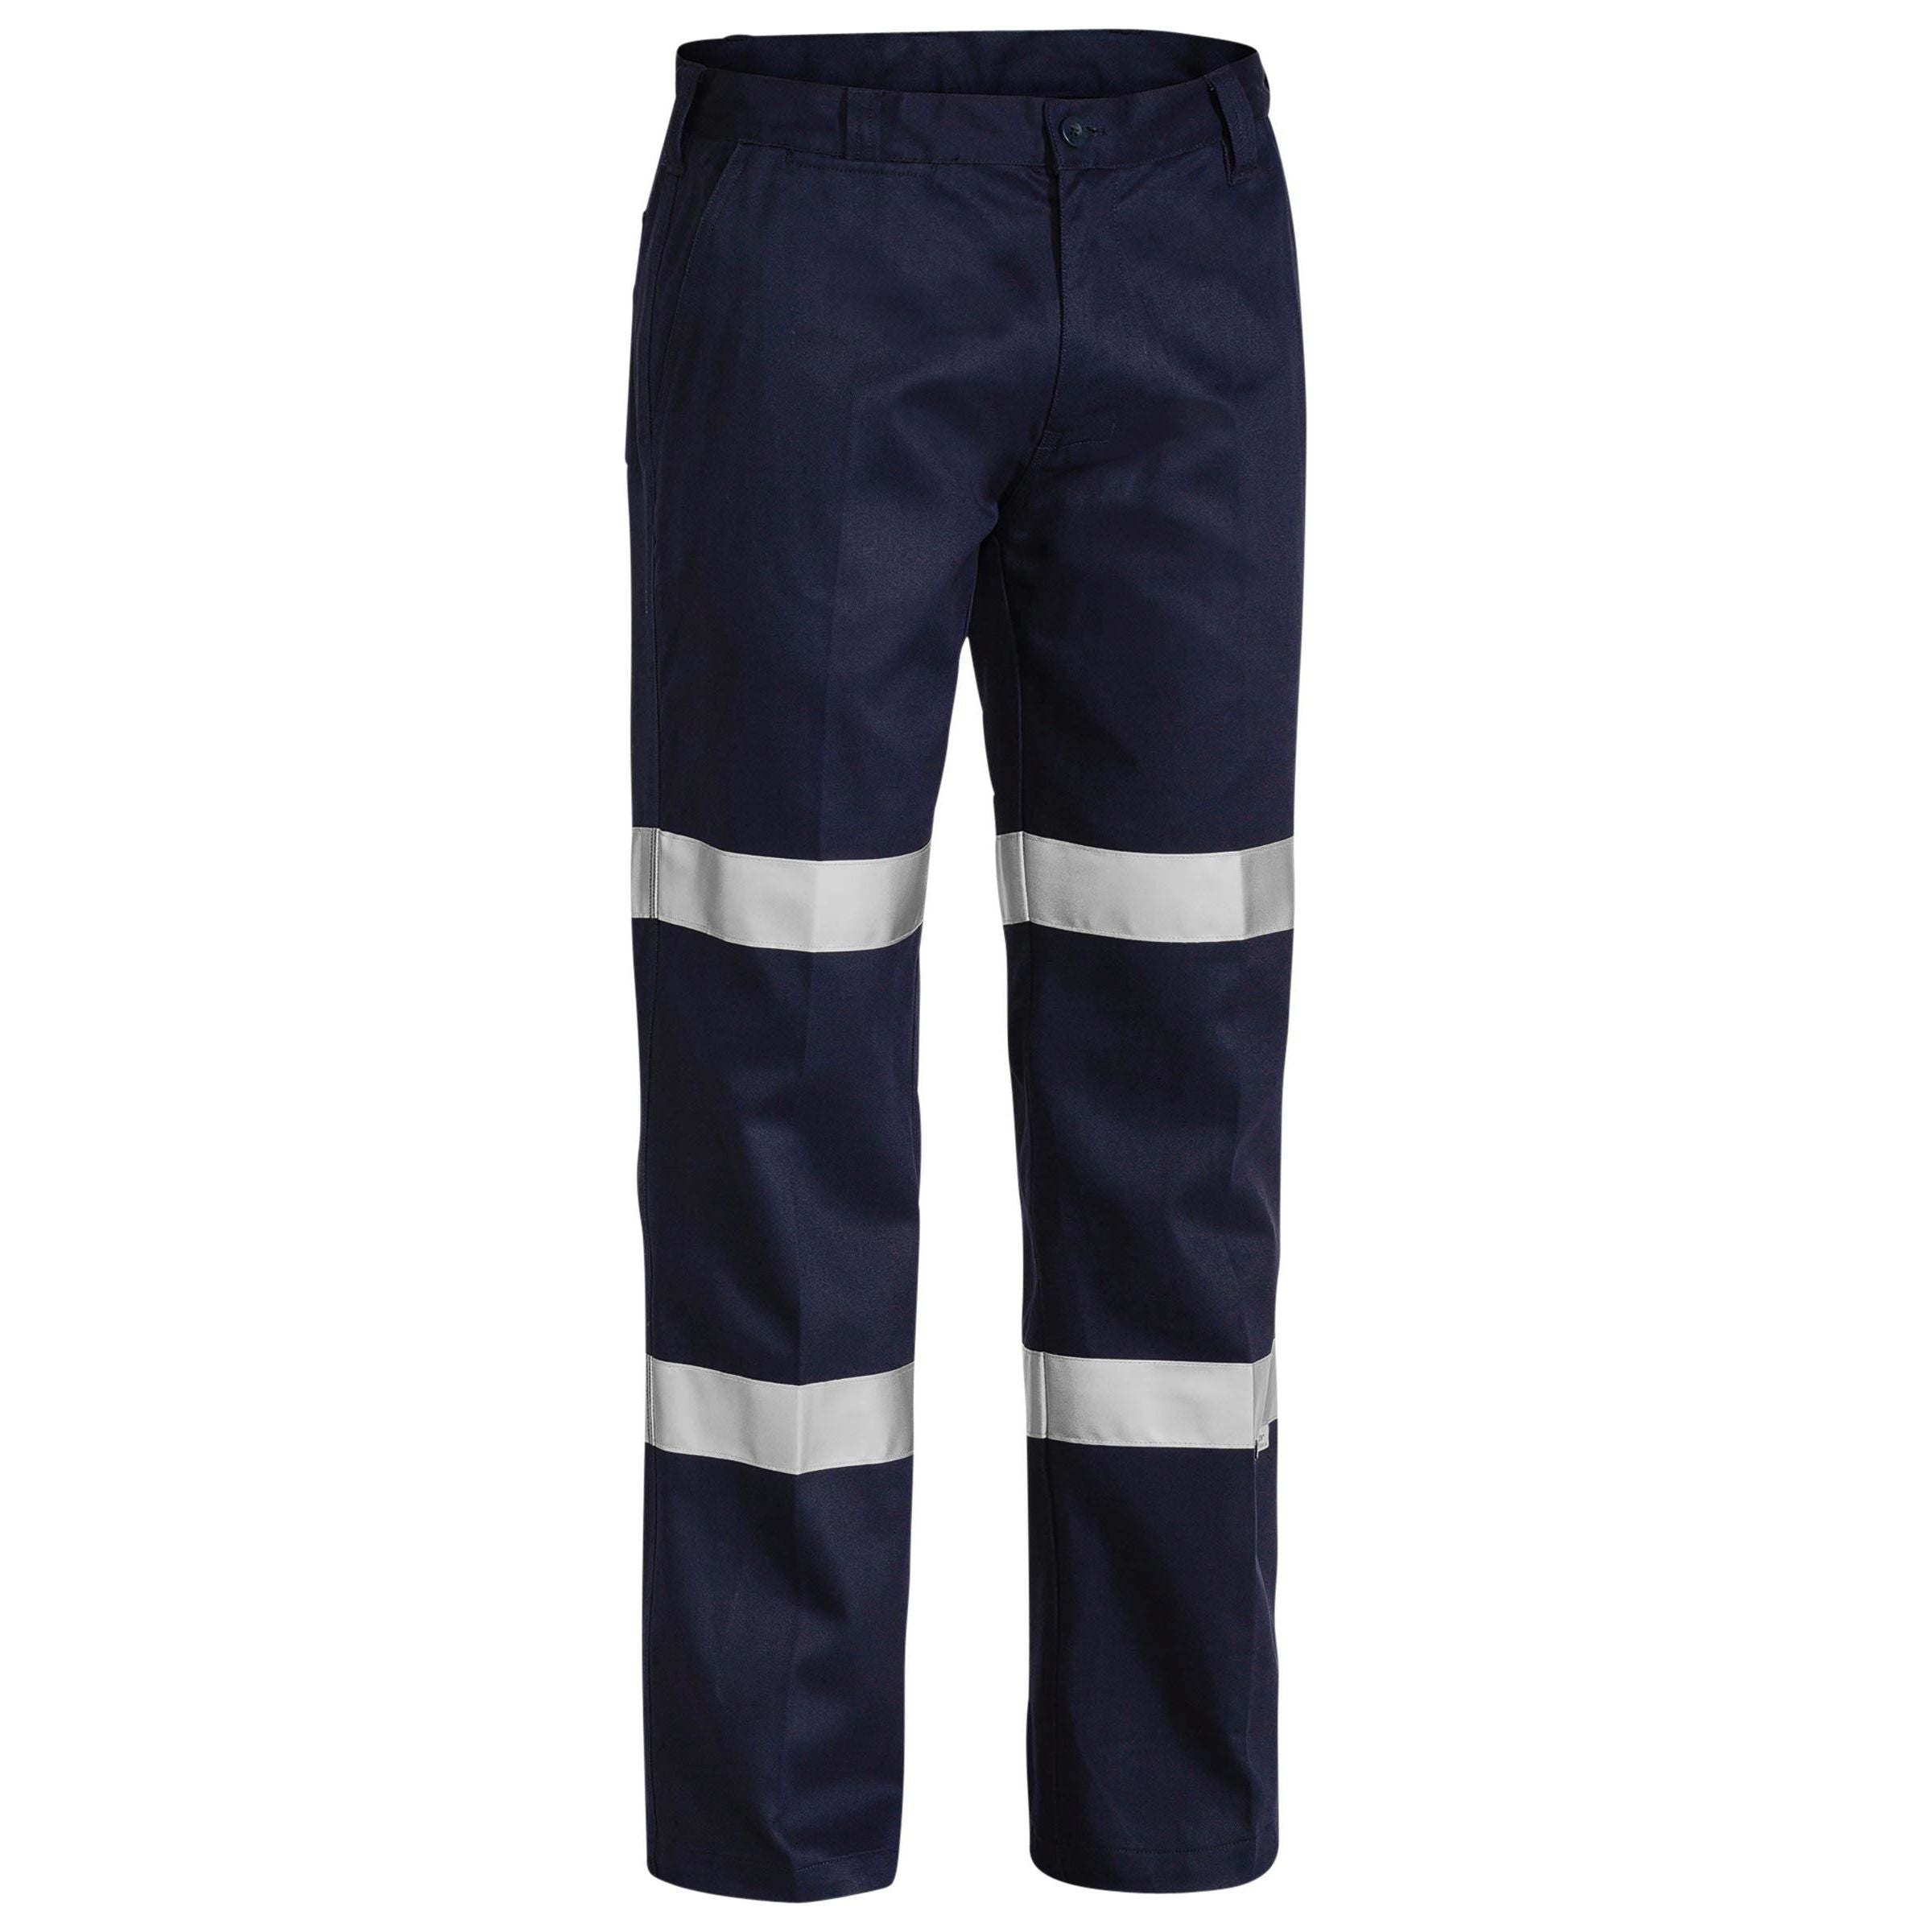 Taped Biomotion Cotton Drill Work Pants - BP6003T